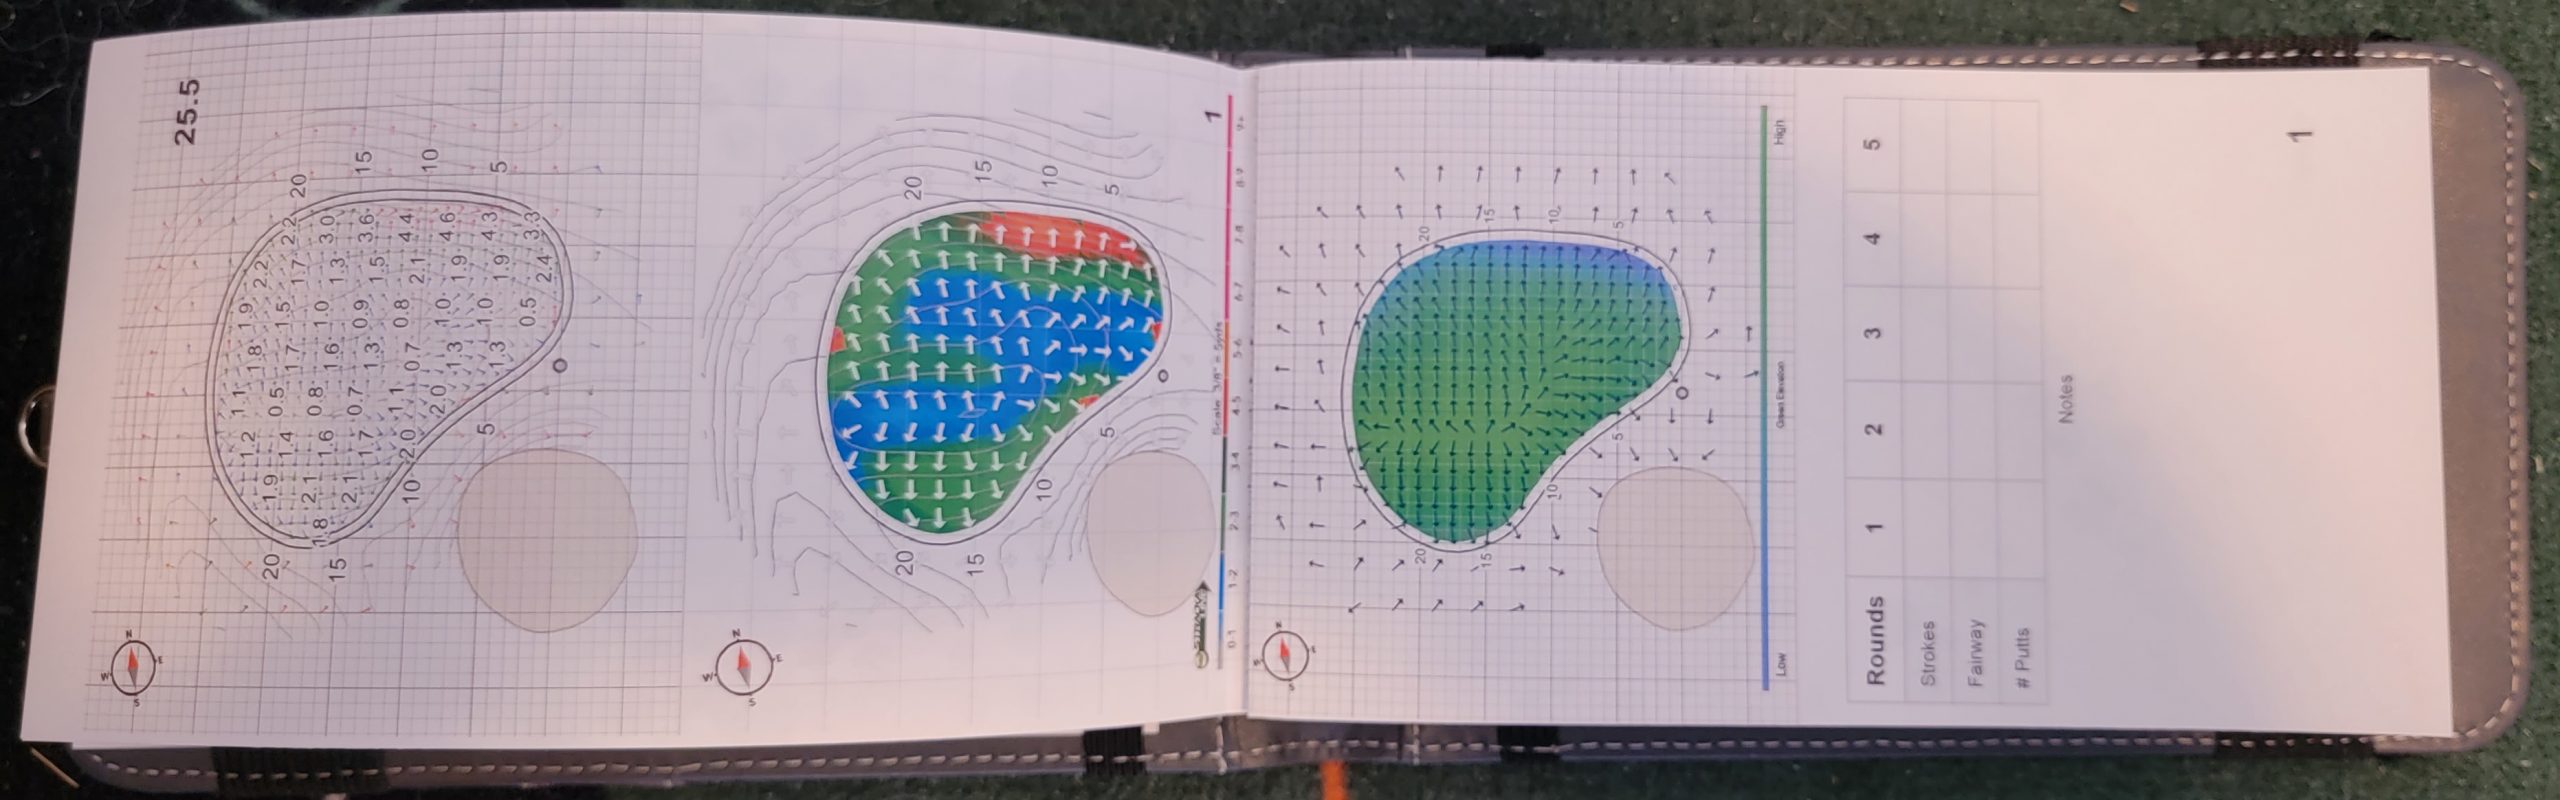 Old Duffer Golf image of a Strackaloine green and yardage book